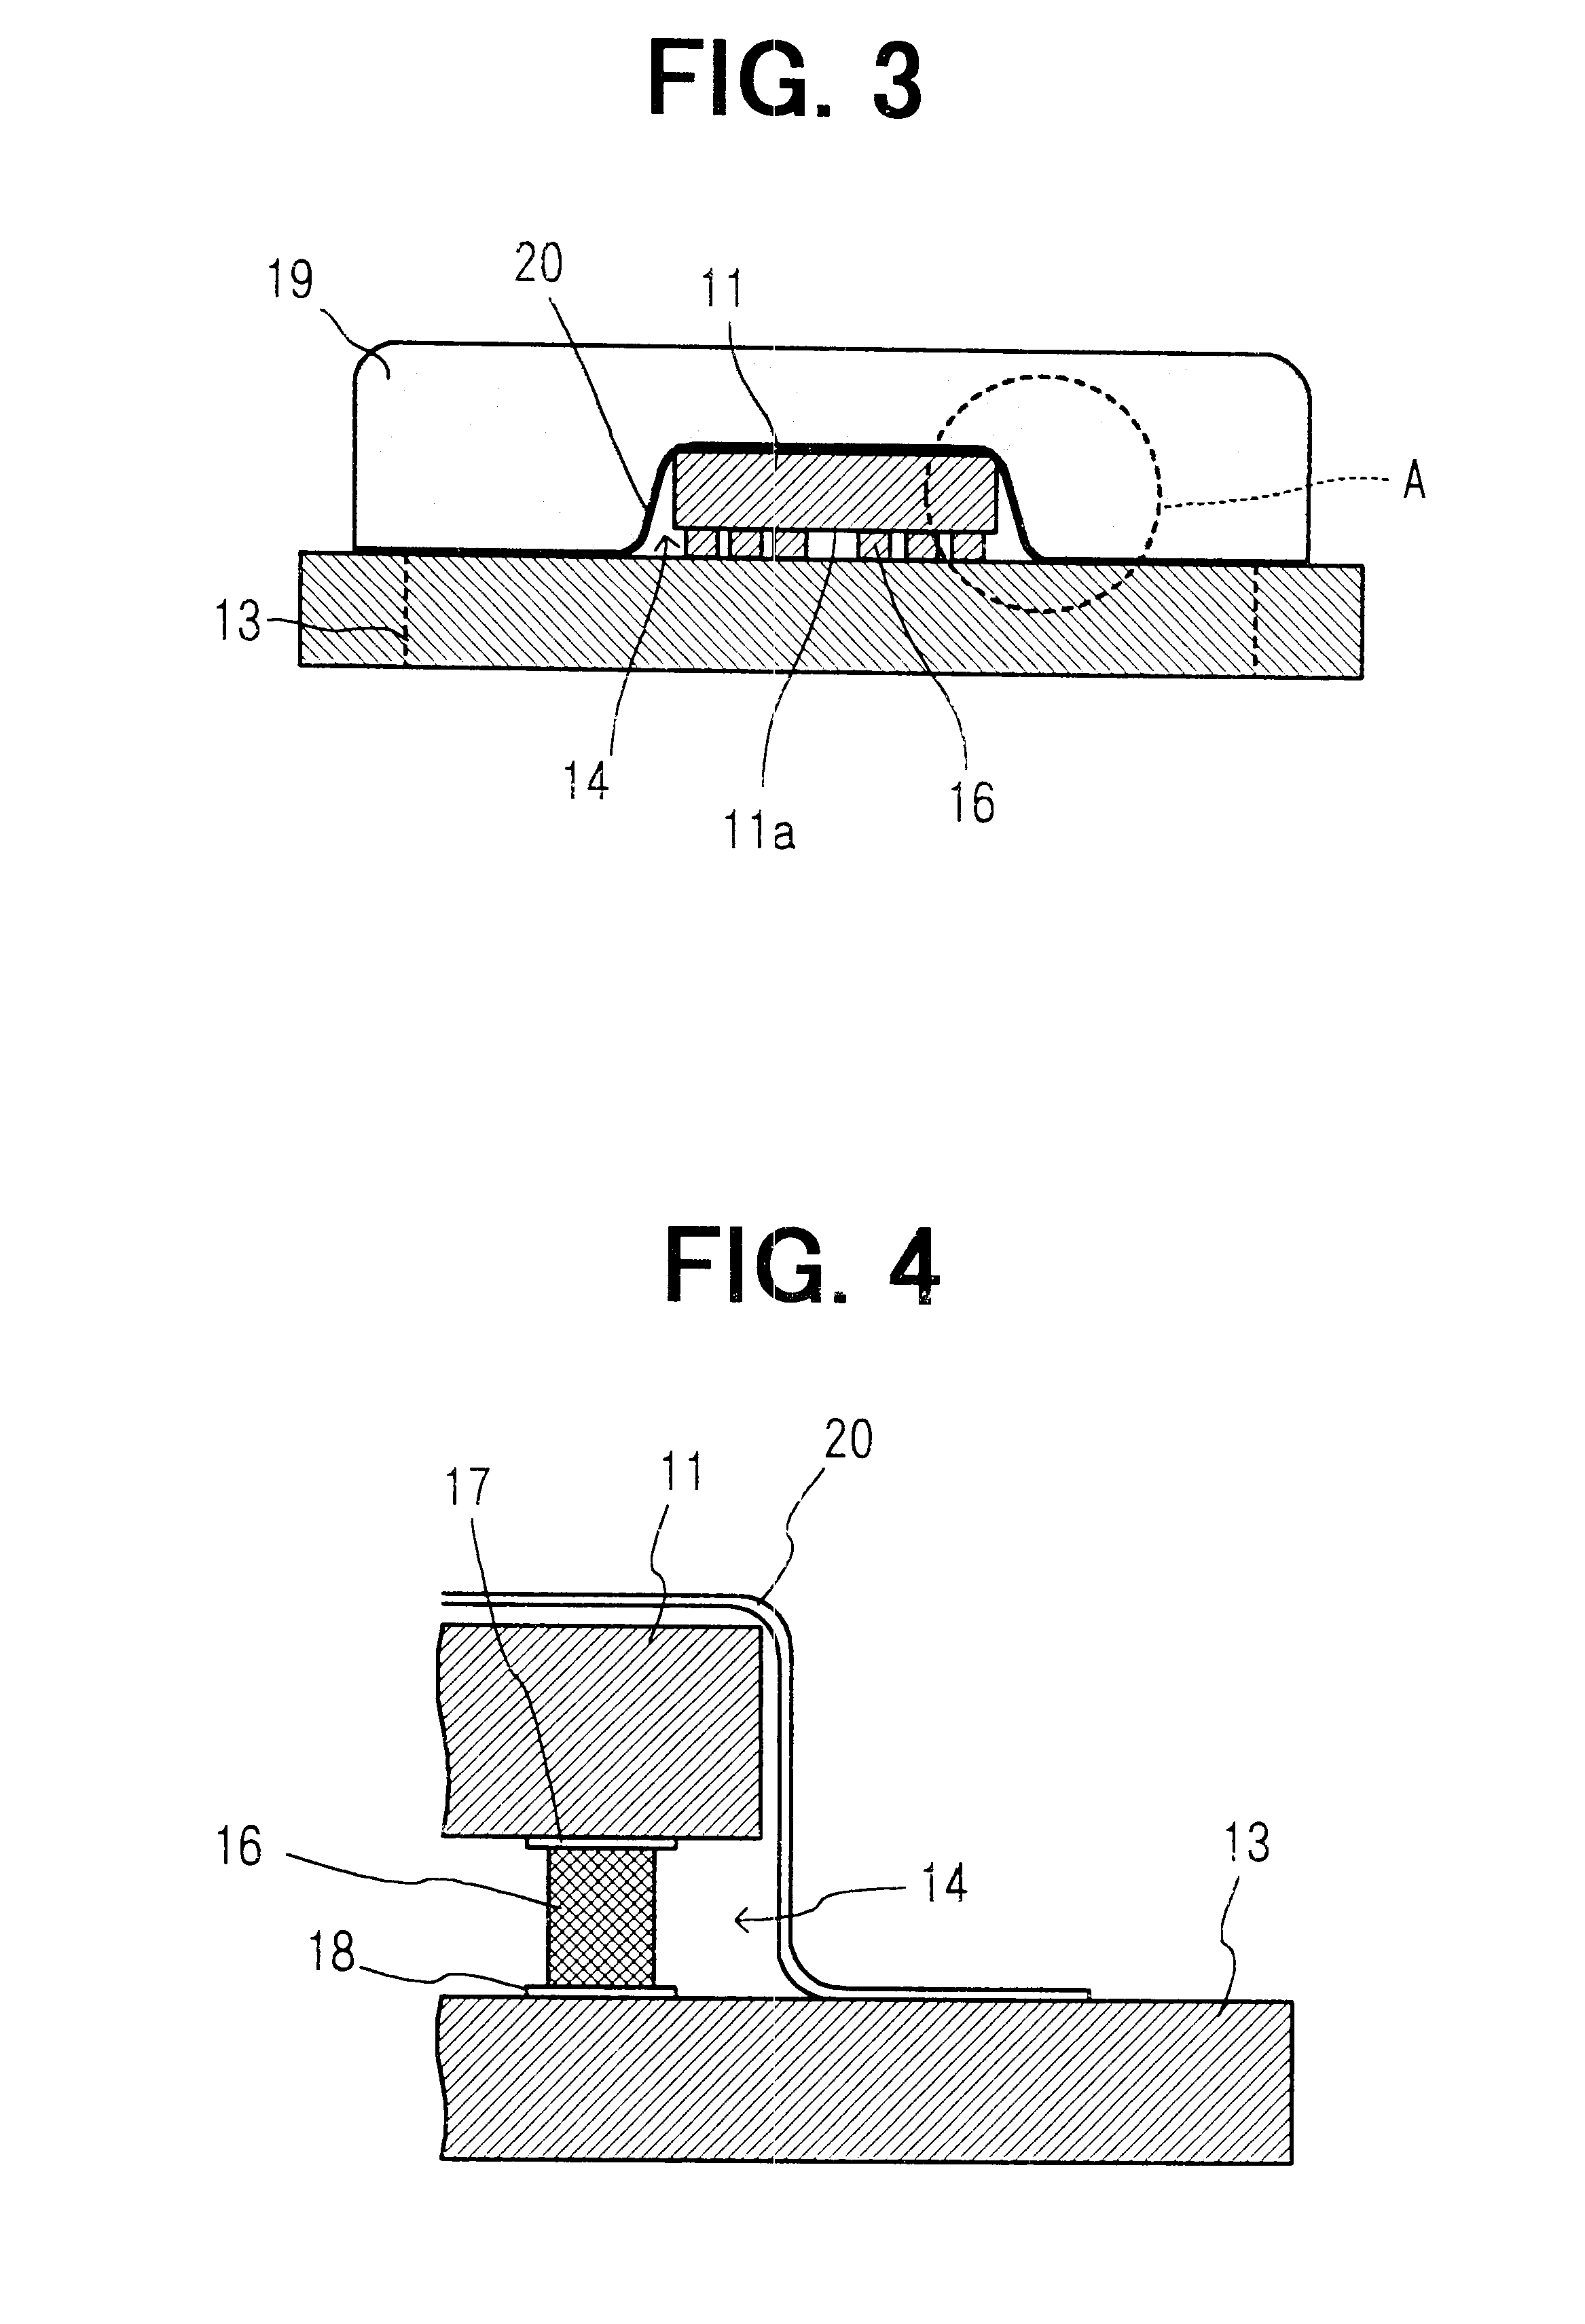 Surface-acoustic wave device package